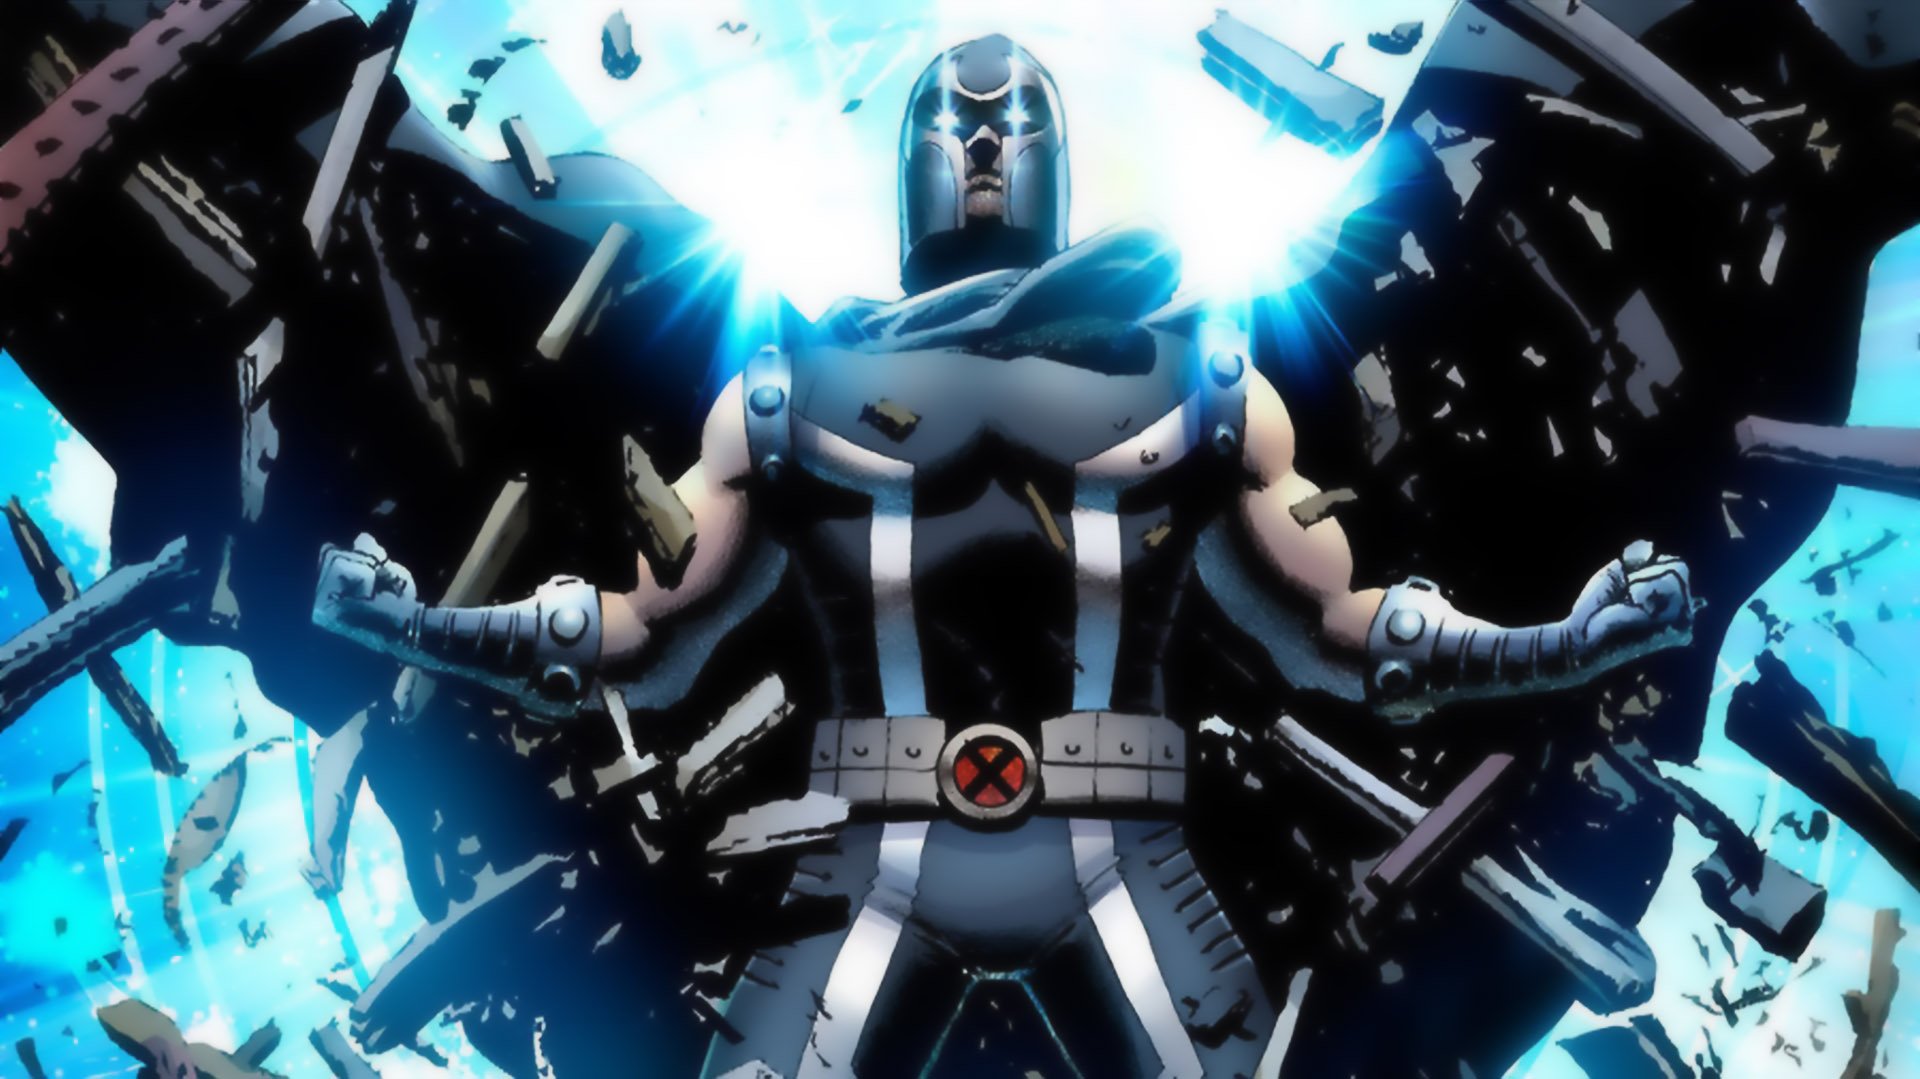 Magneto Wallpaper and Background Image | 1920x1079 | ID ...